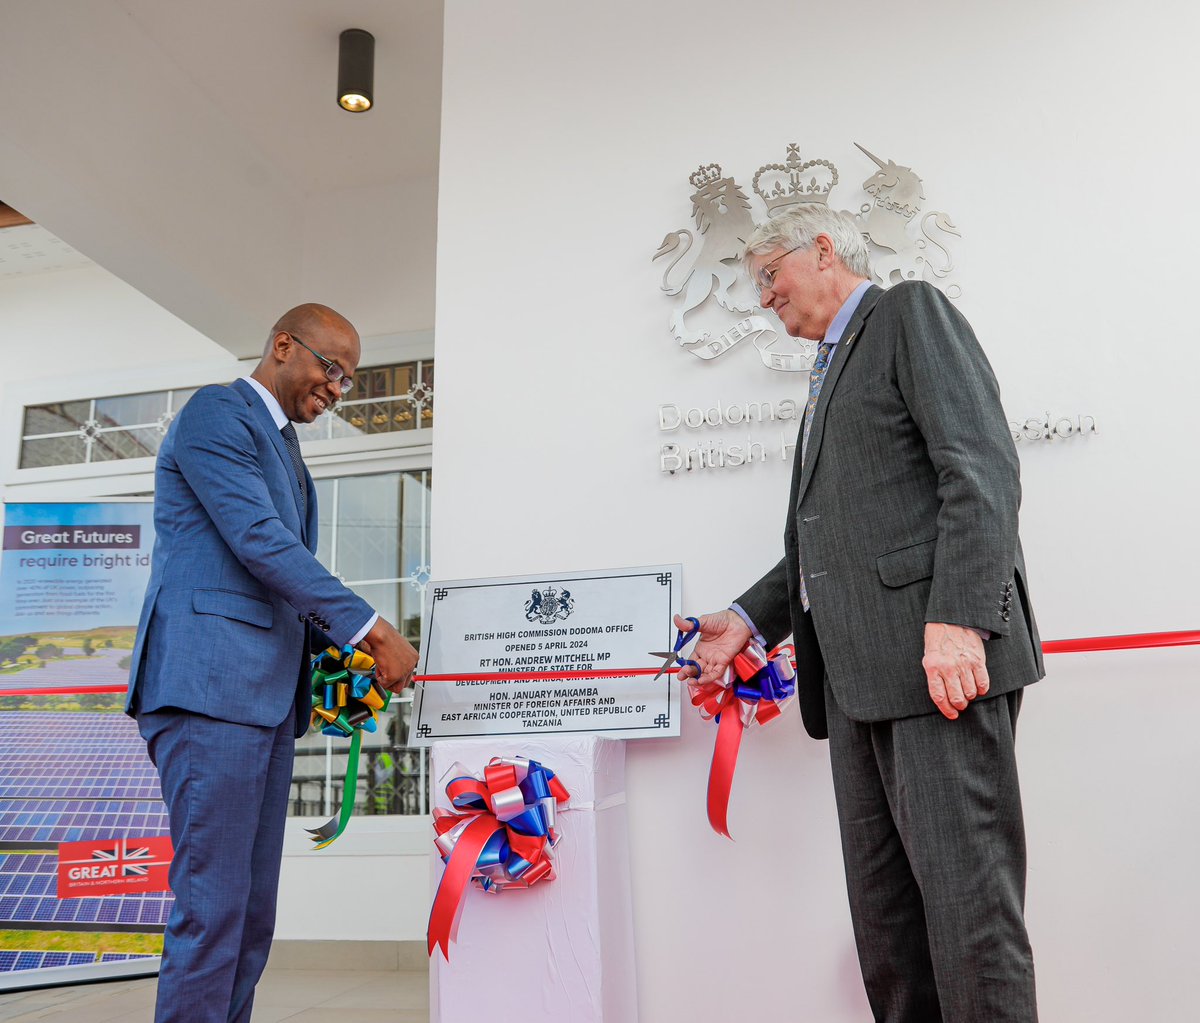 Today Foreign Minister January Makamba @JMakamba and I officially opened the UK High Commission office in Dodoma. The office will enable closer working between the UK and Tanzania, strengthening our historic partnership 🇹🇿🇬🇧